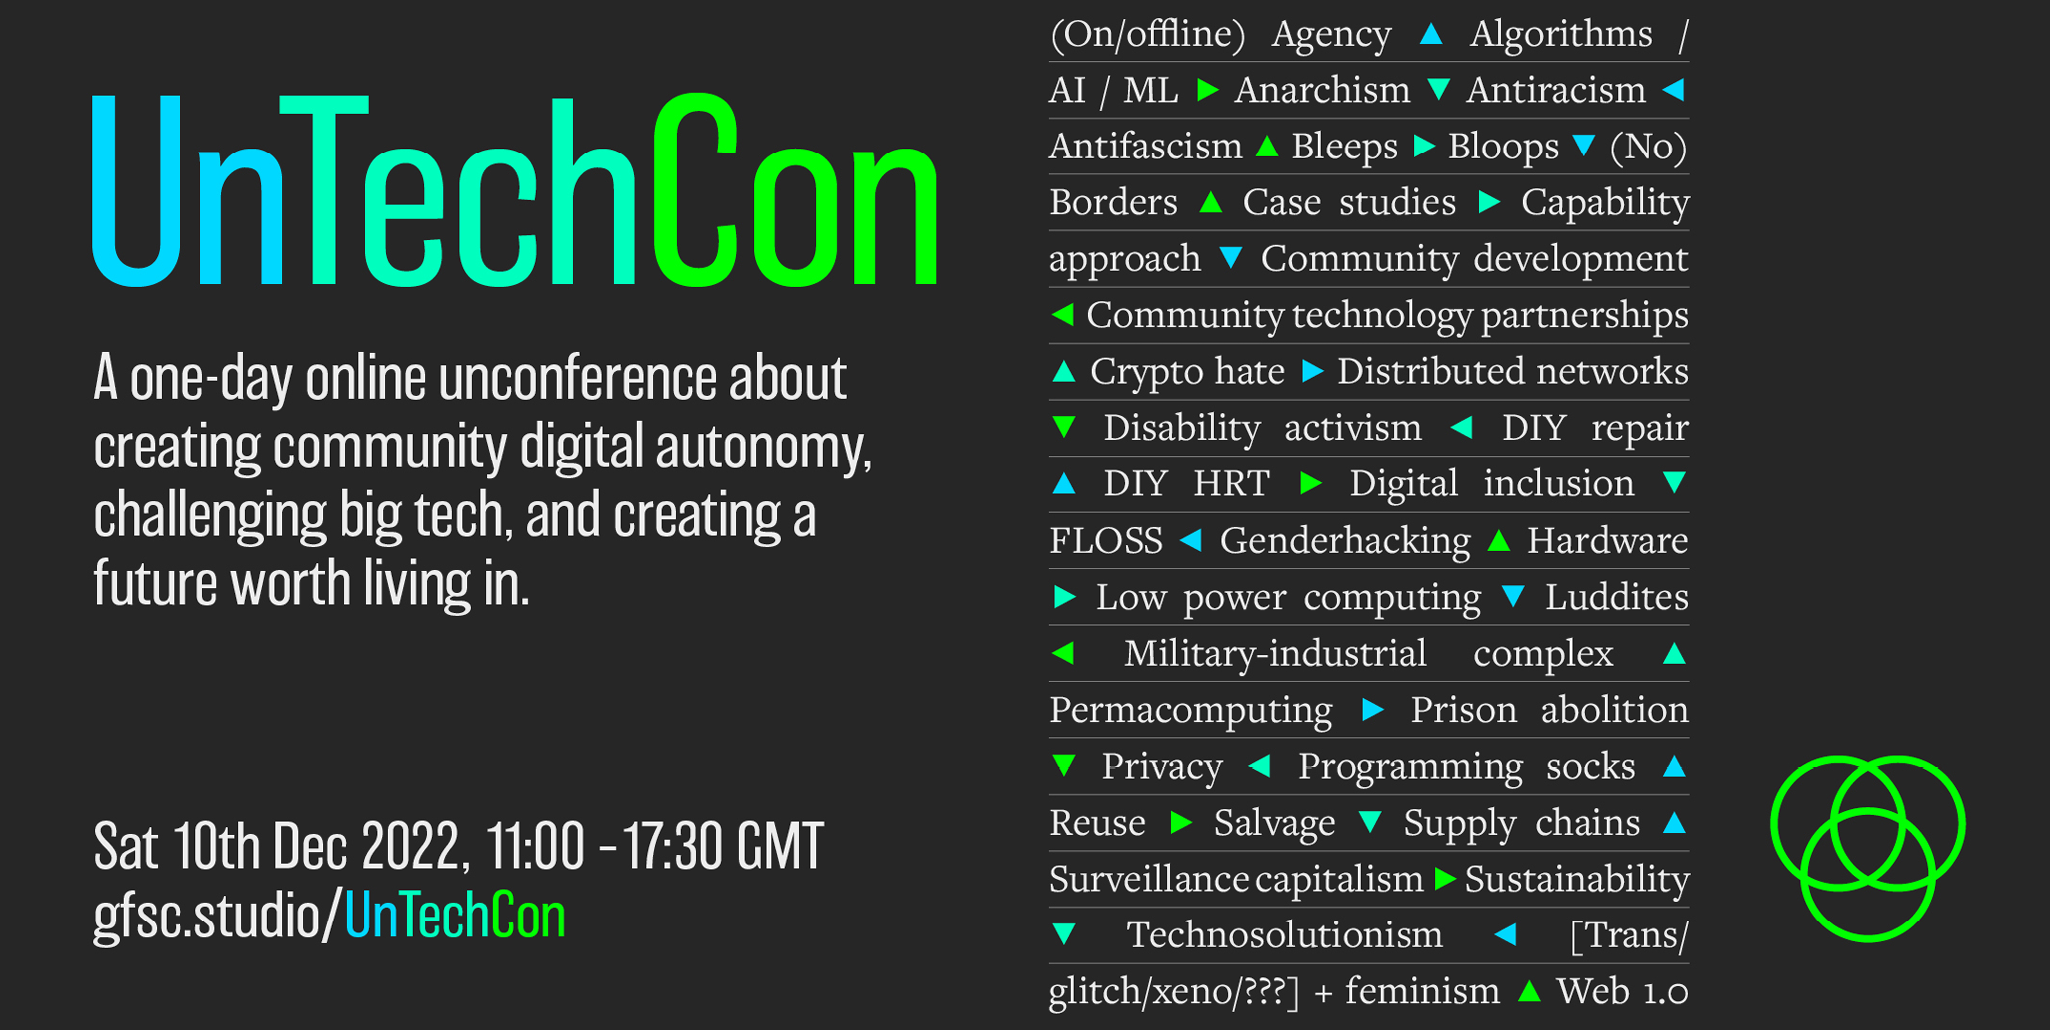 a graphic with the information for UnTechCon 1. it has a subheading reading 'A one-day online unconference about creating community digital autonomy, challenging big tech, and creating a future worth living in'